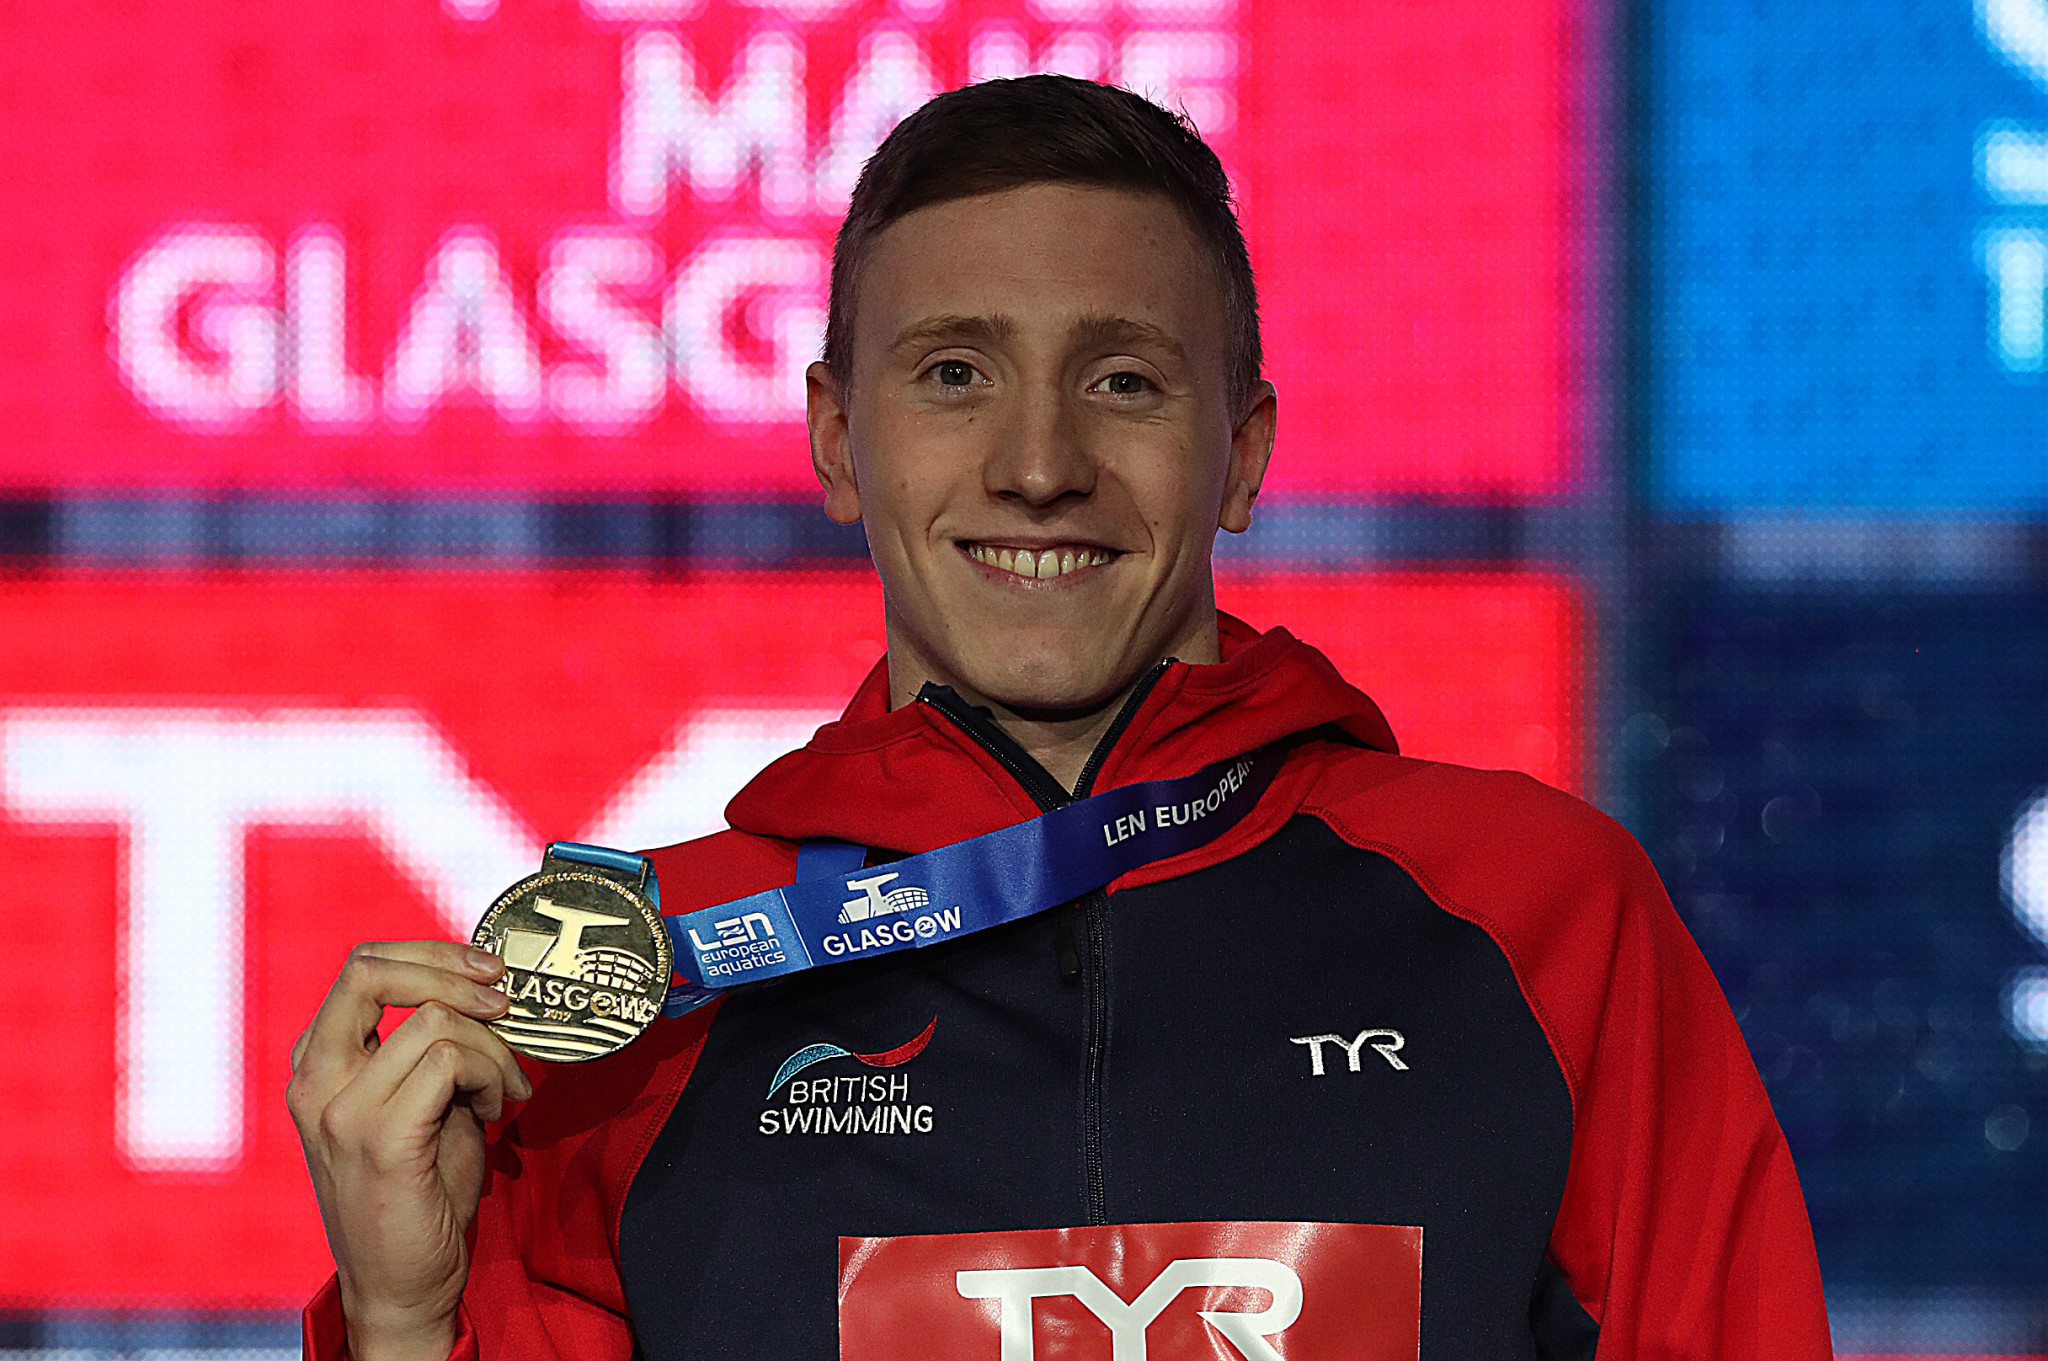 Max Litchfield won the men's 400m individual medley event ©Getty Images